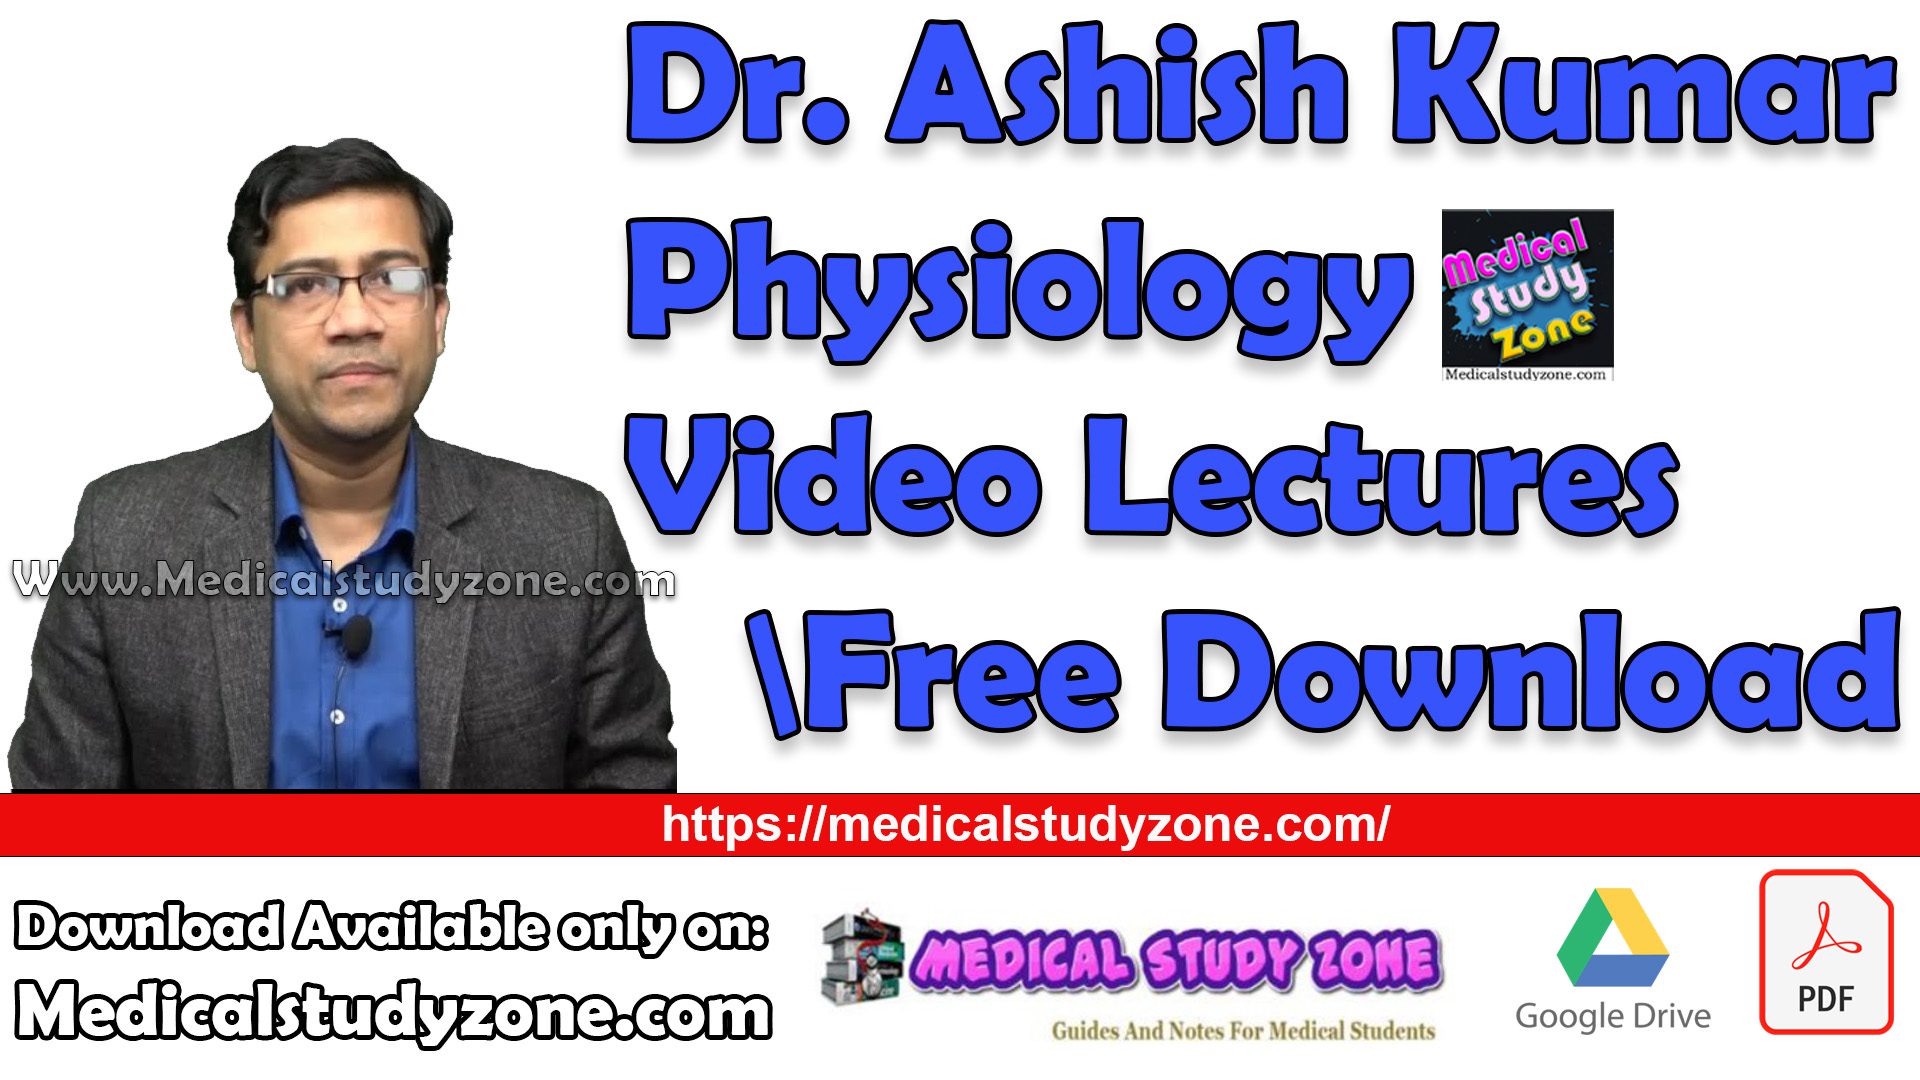 Dr. Ashish Kumar Physiology Video Lectures Free Download